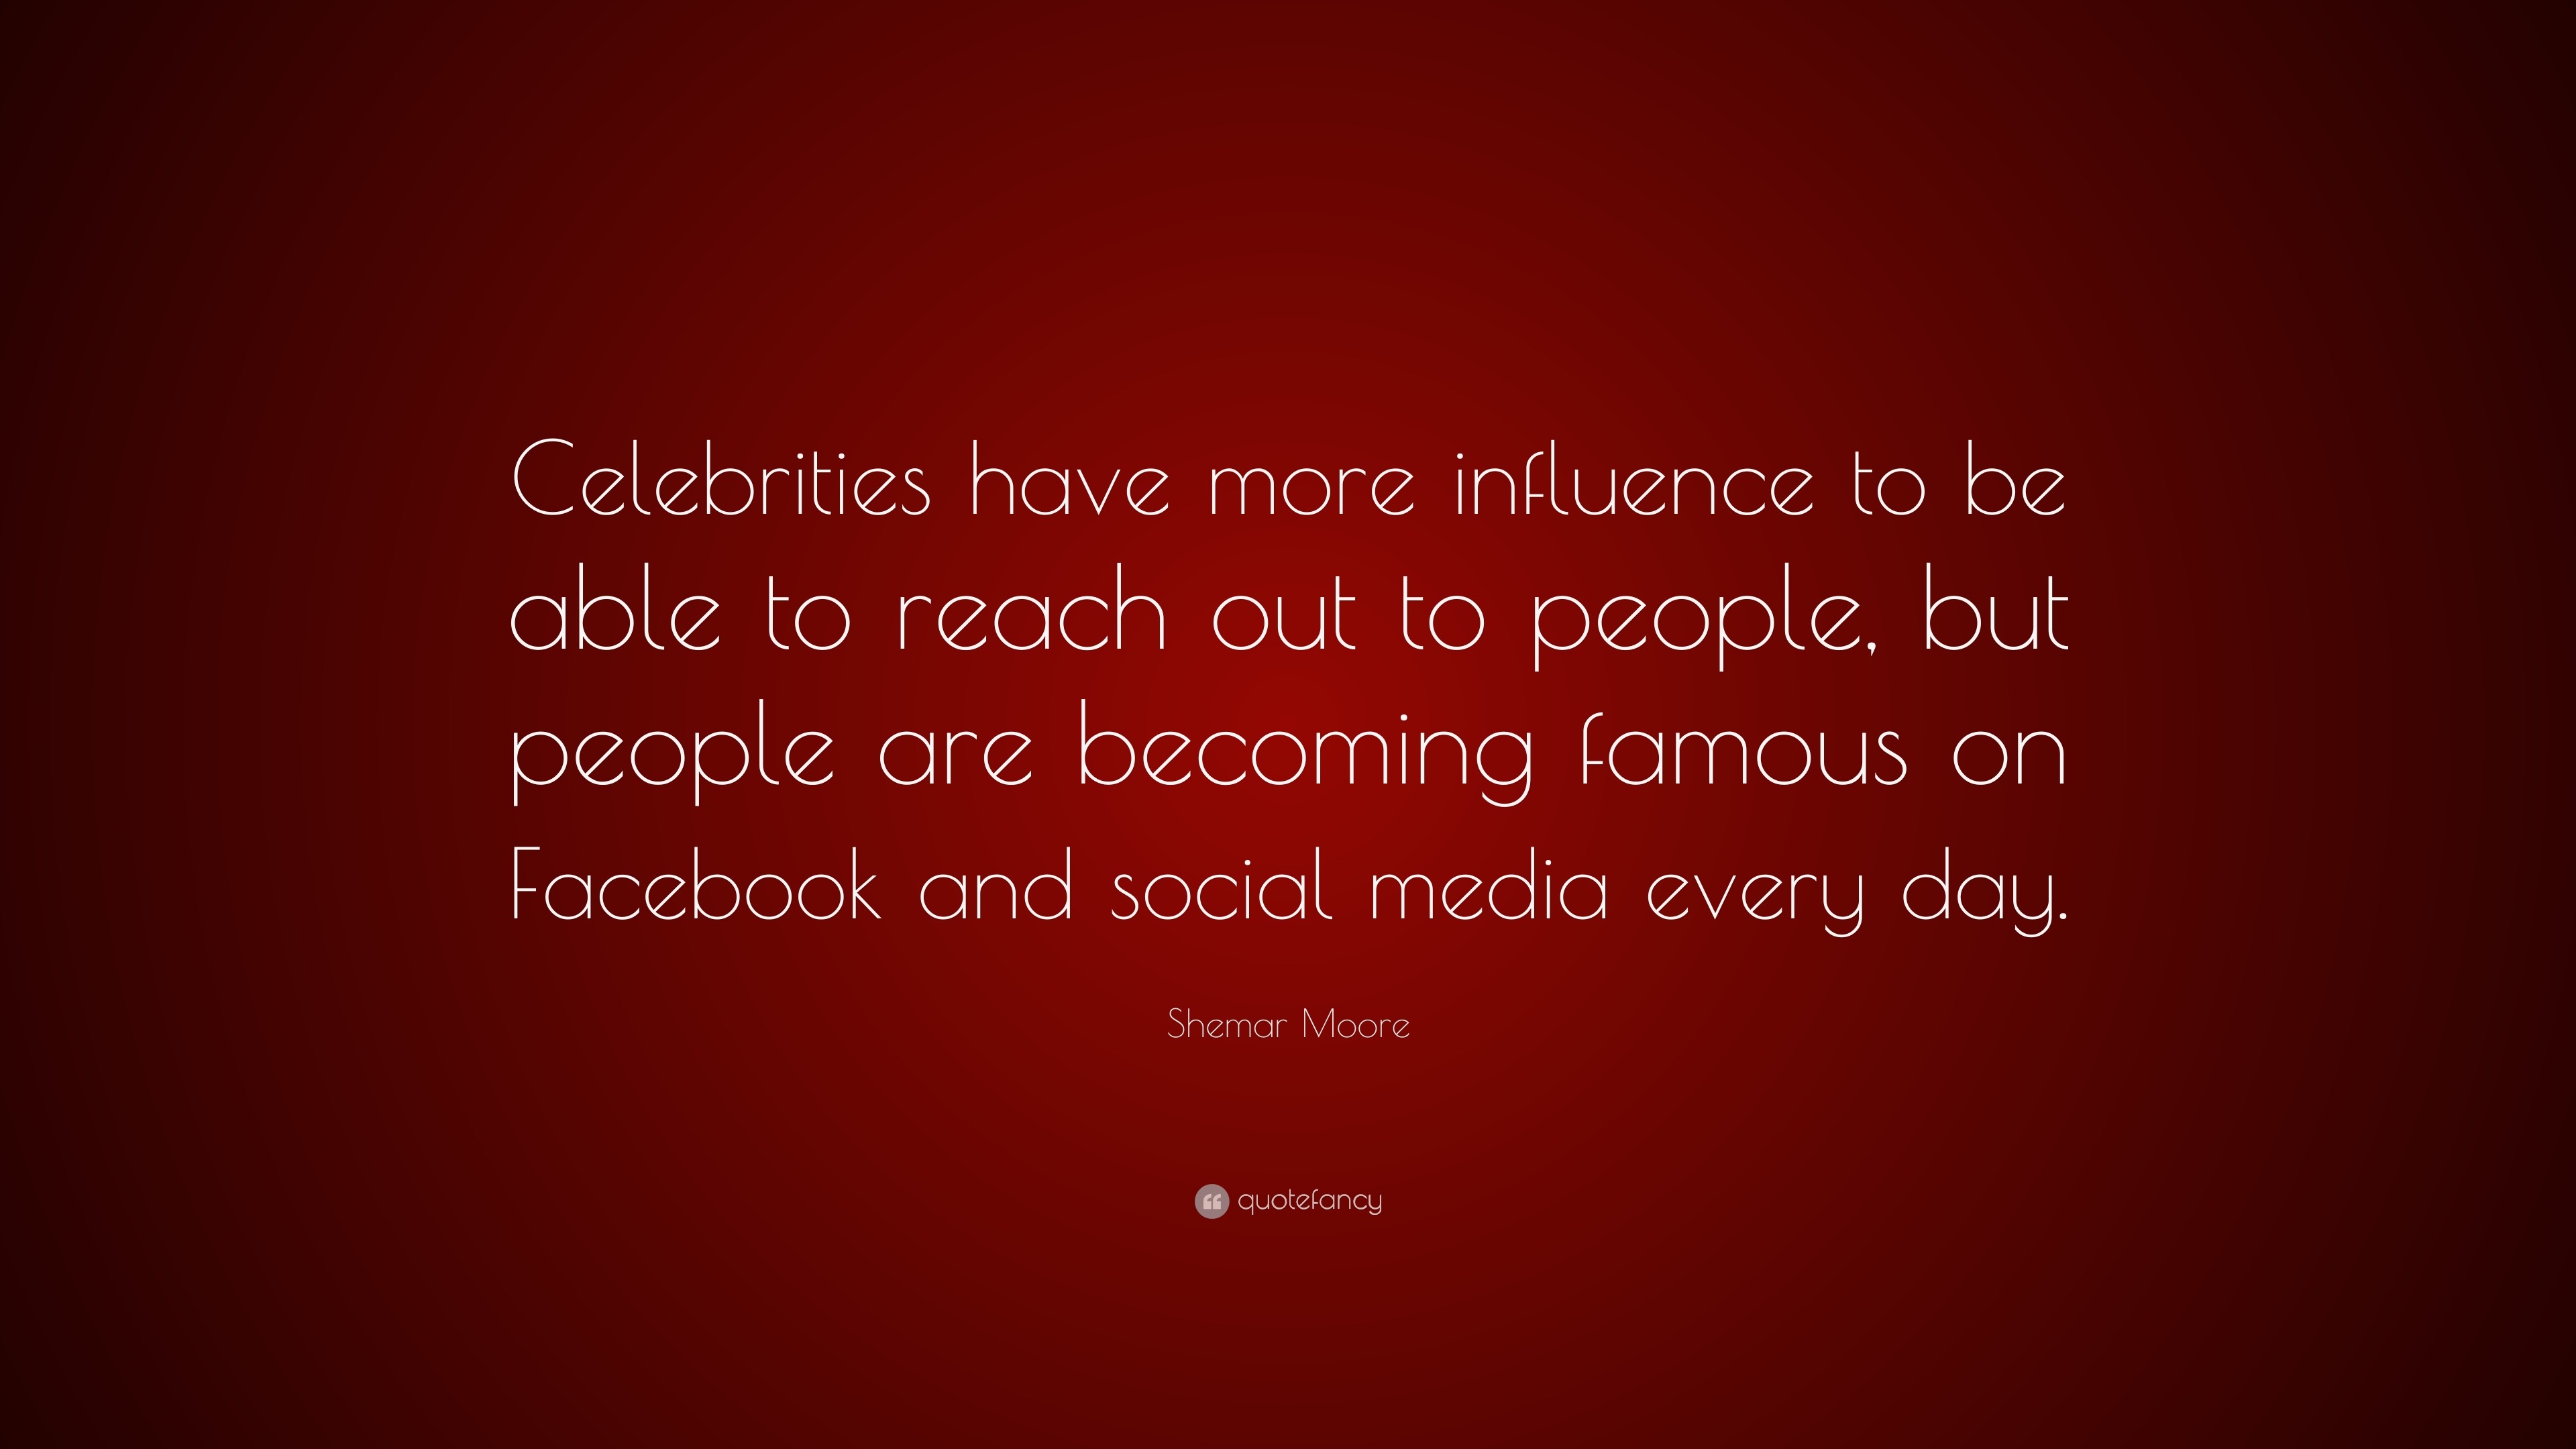 the influence of celebrities